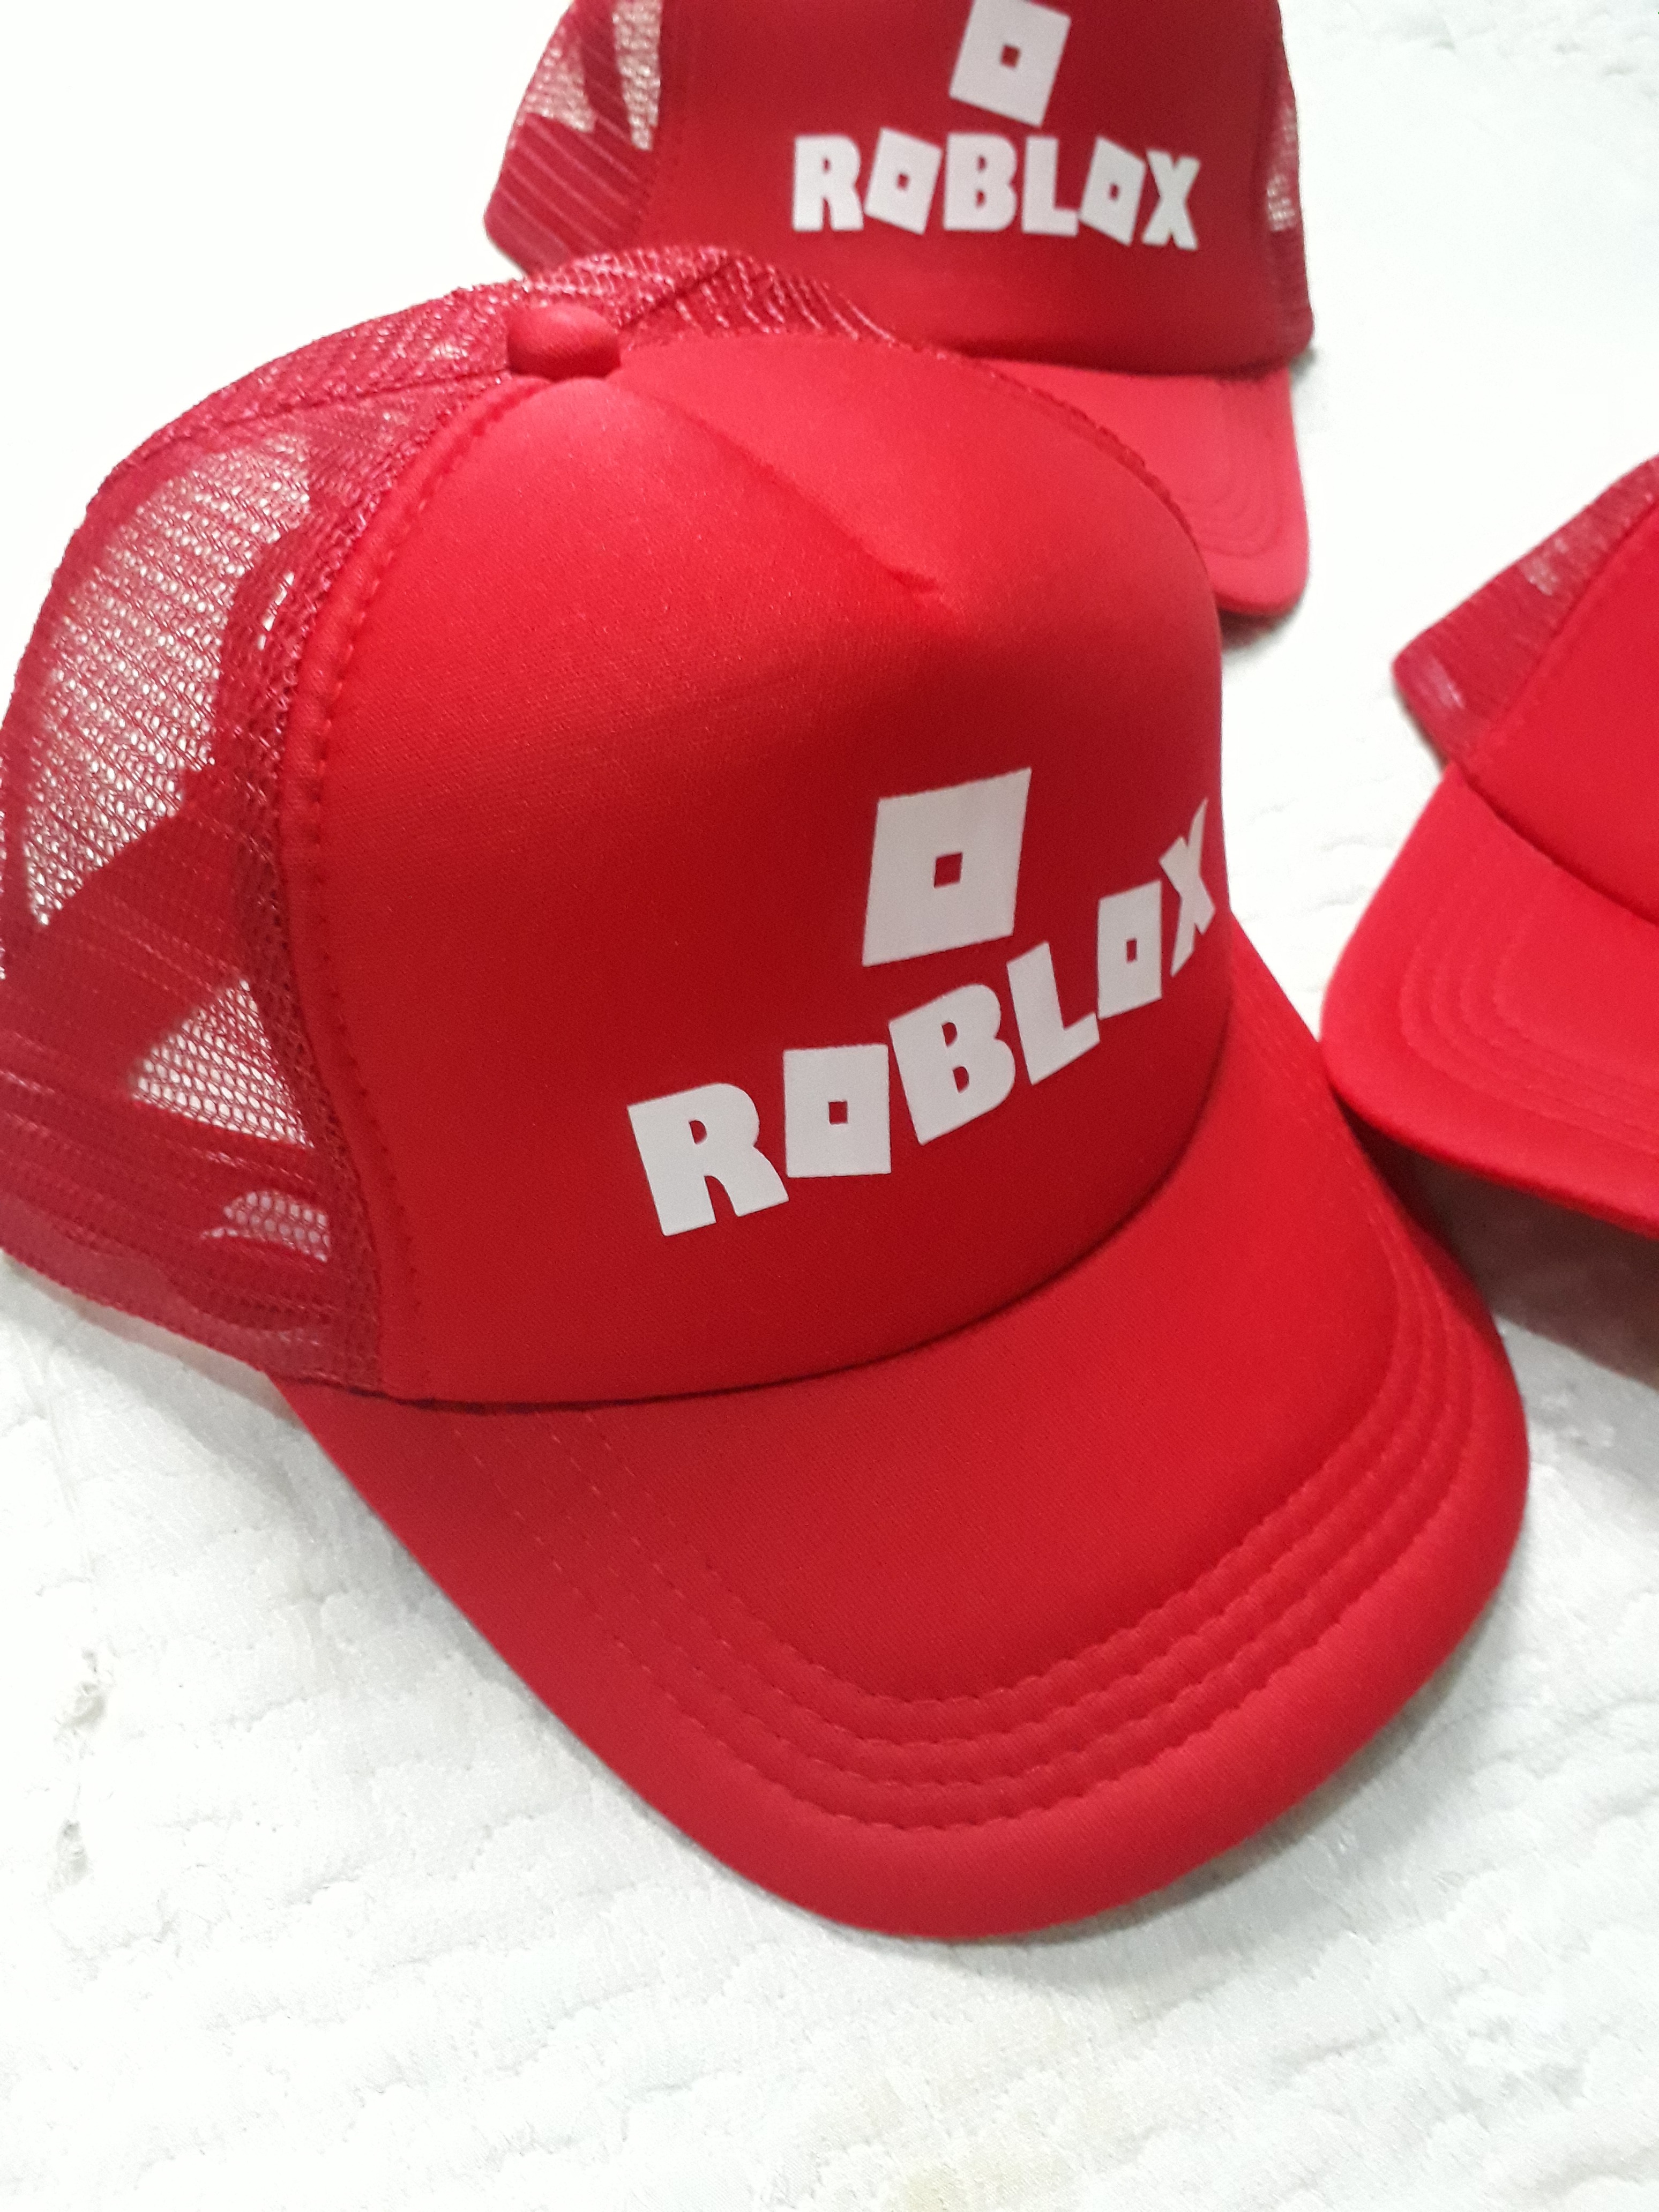 roblox r baseball cap by roblox free red roblox cap by